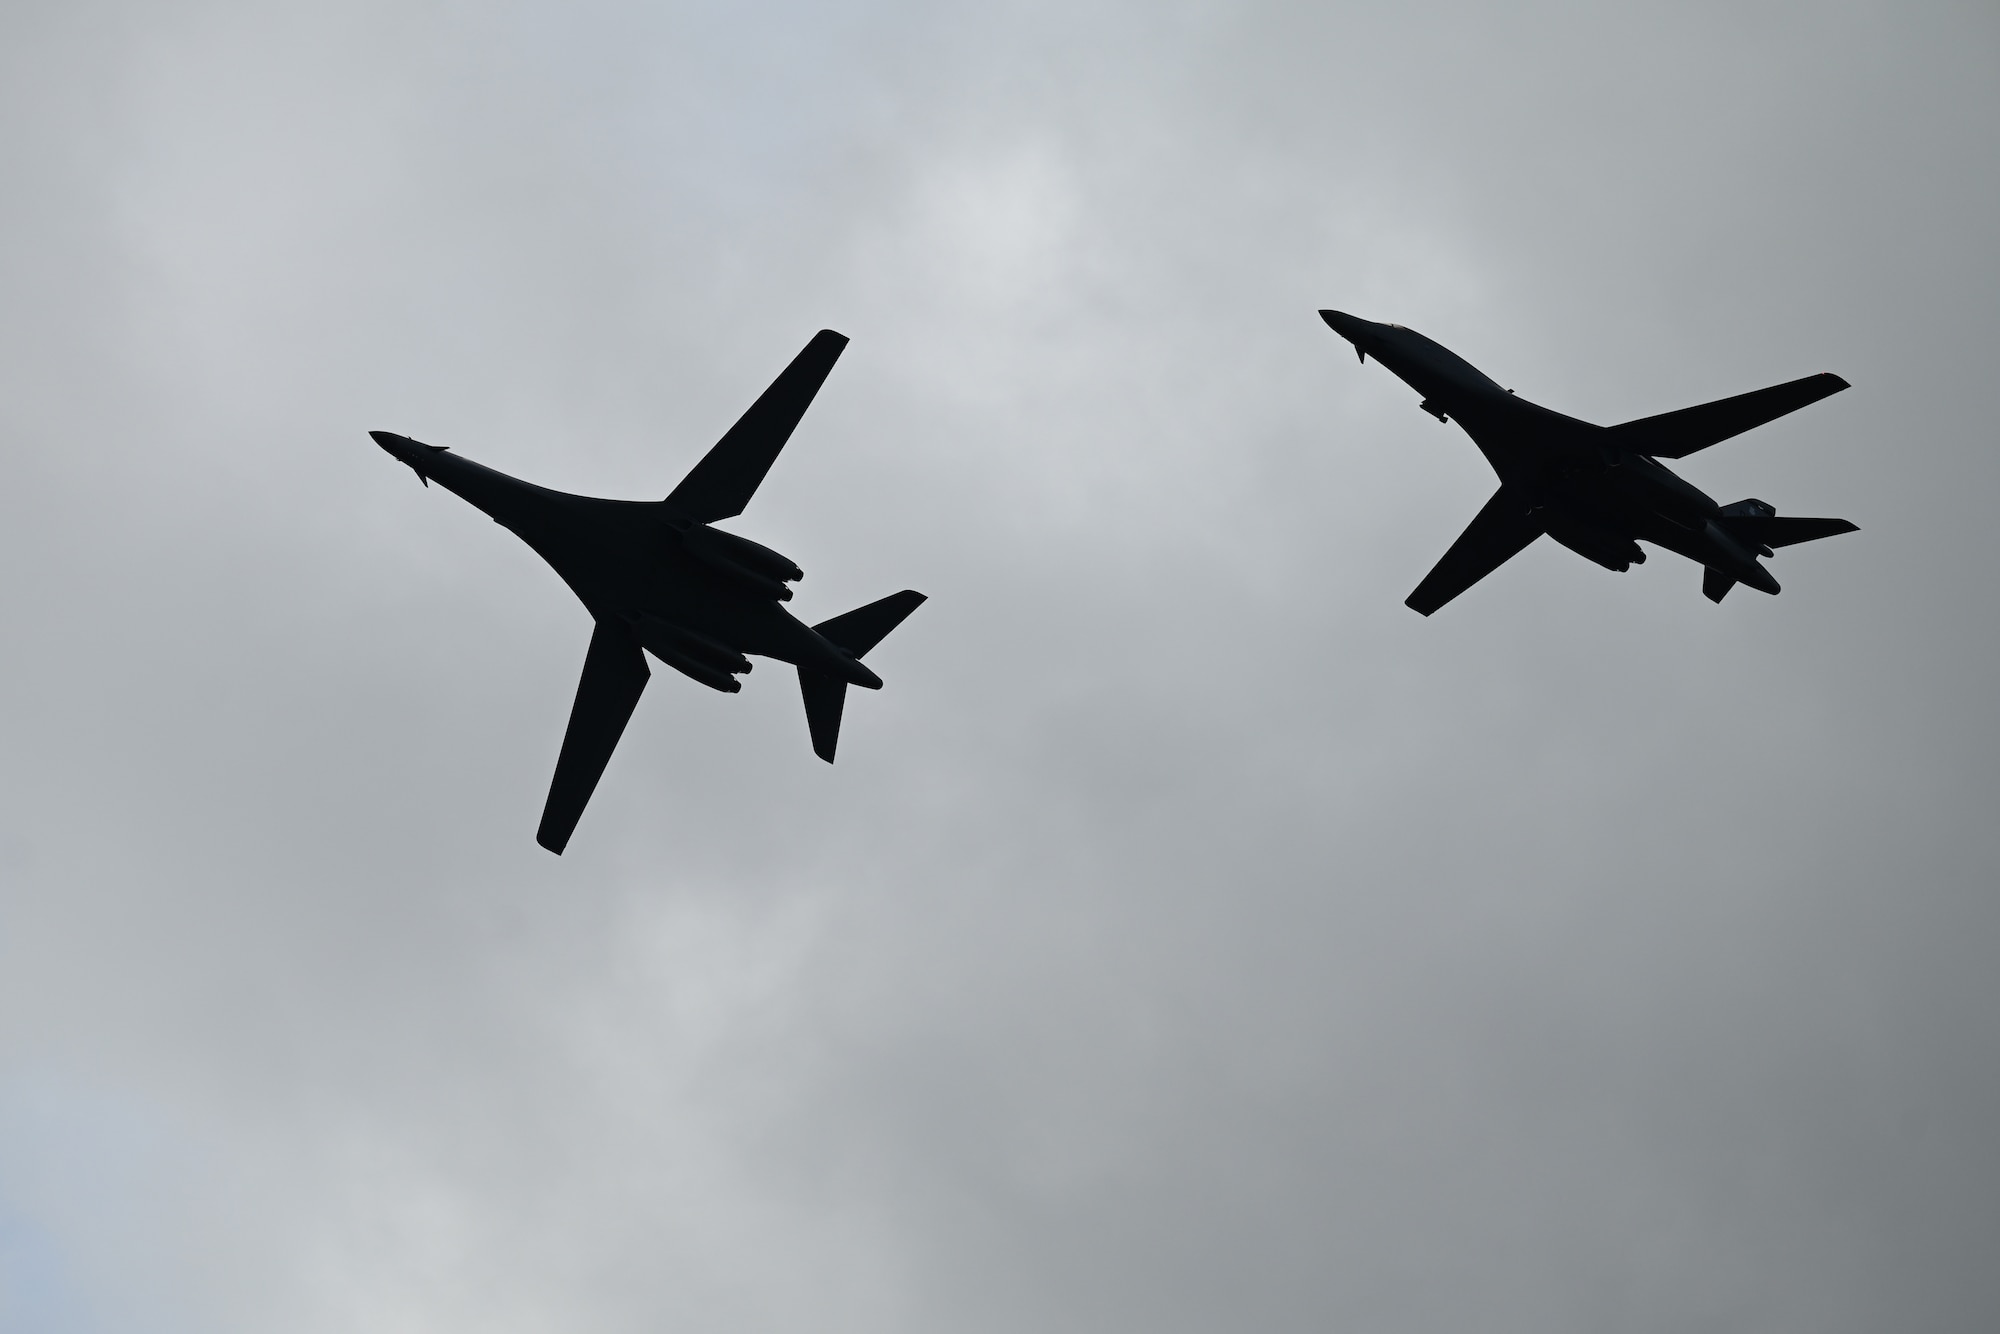 Two B-1B Lancers from Dyess Air Force Base, Texas, fly over Morón Air Base, Spain, during Bomber Task Force 24-2, March 26, 2024. Regular and routine deployments of strategic bombers provide the U.S. with critical touchpoints to train and operate alongside Allies and partners while bolstering collective response to any global conflict. (U.S. Air Force photo by Staff Sgt. Holly Cook)